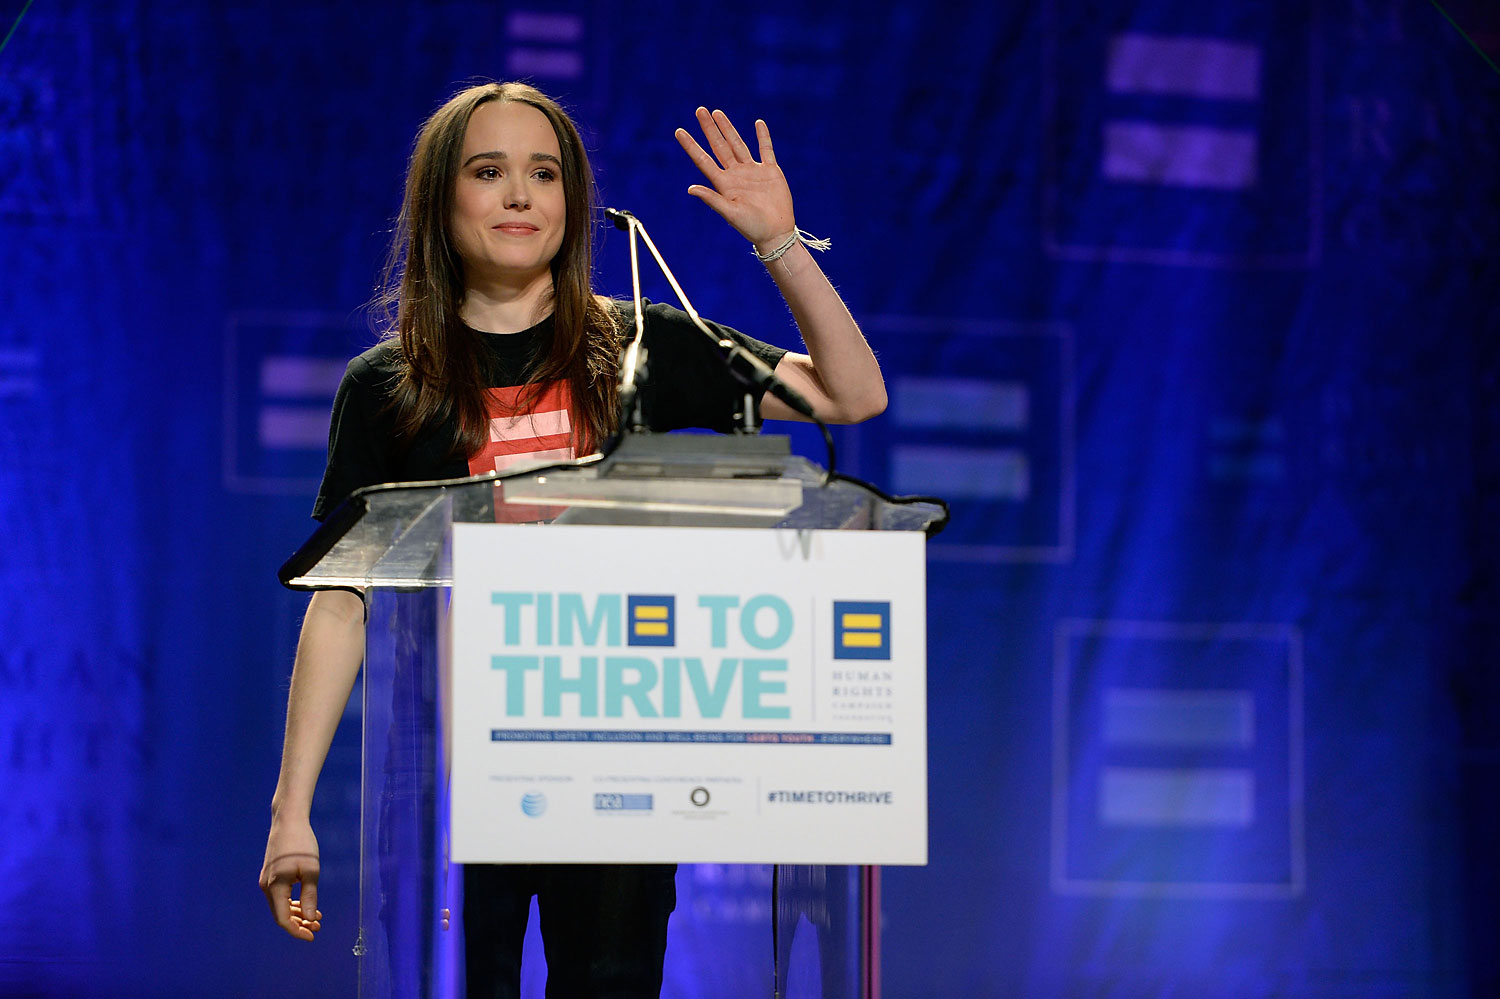 Actress Ellen Page comes out as gay at the Human Rights Campaign's Time to Thrive Conference on Feb. 14, 2014, in Las Vegas (Jeff Bottari—Human Rights Campaign/AP)